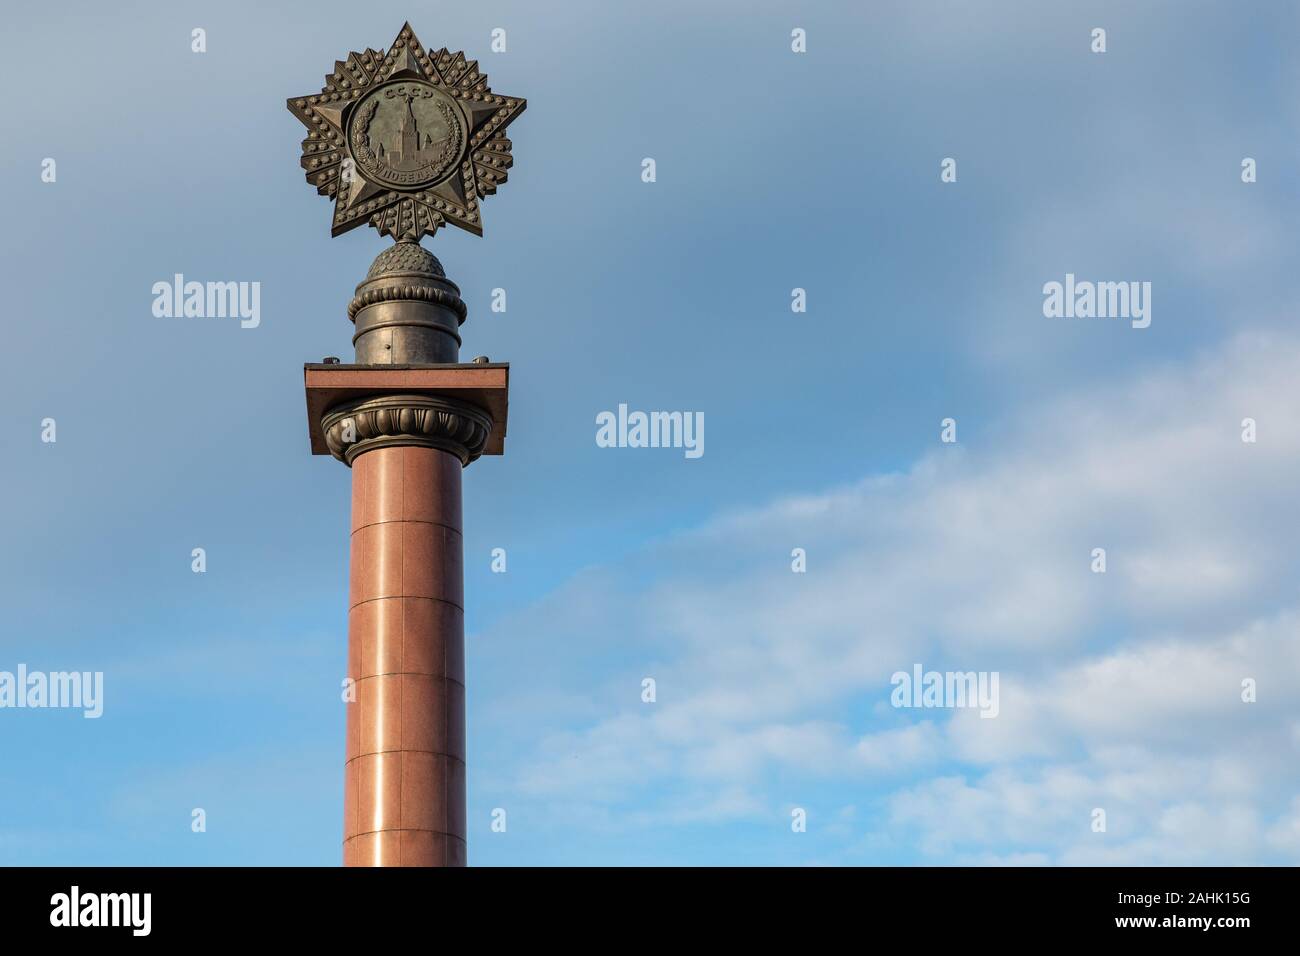 Victory Square in Kaliningrad. Russian emblem on the top of the column. Kaliningrad Stock Photo